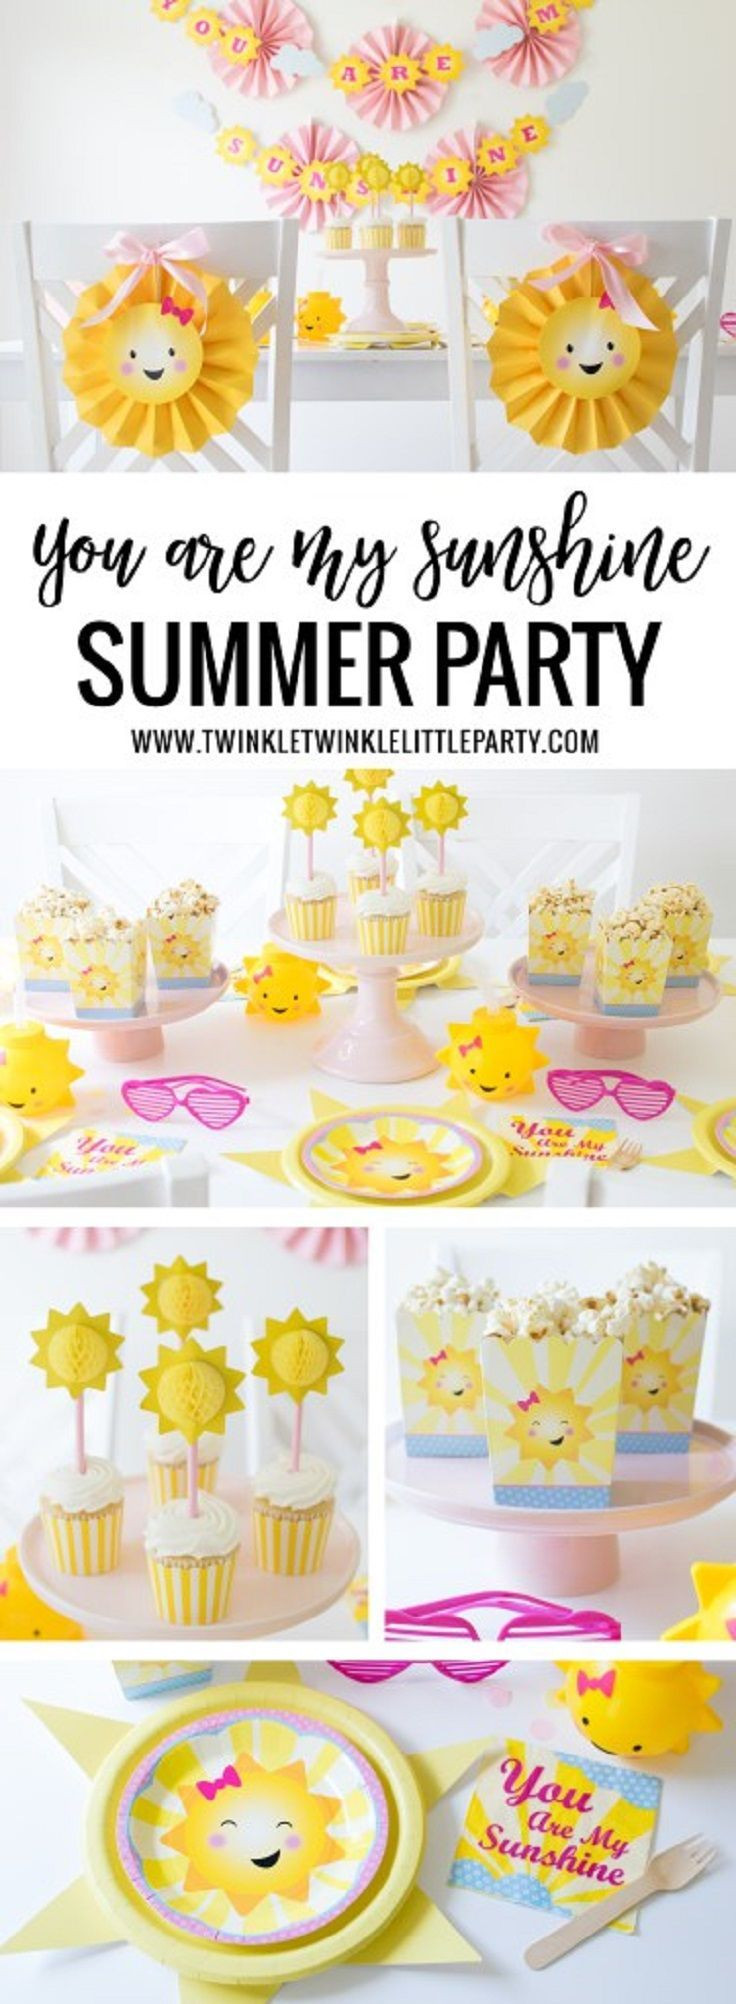 Cheap Summer Party Ideas
 You are my Sunshine’ Party – Summer Party Idea 11 Cheap